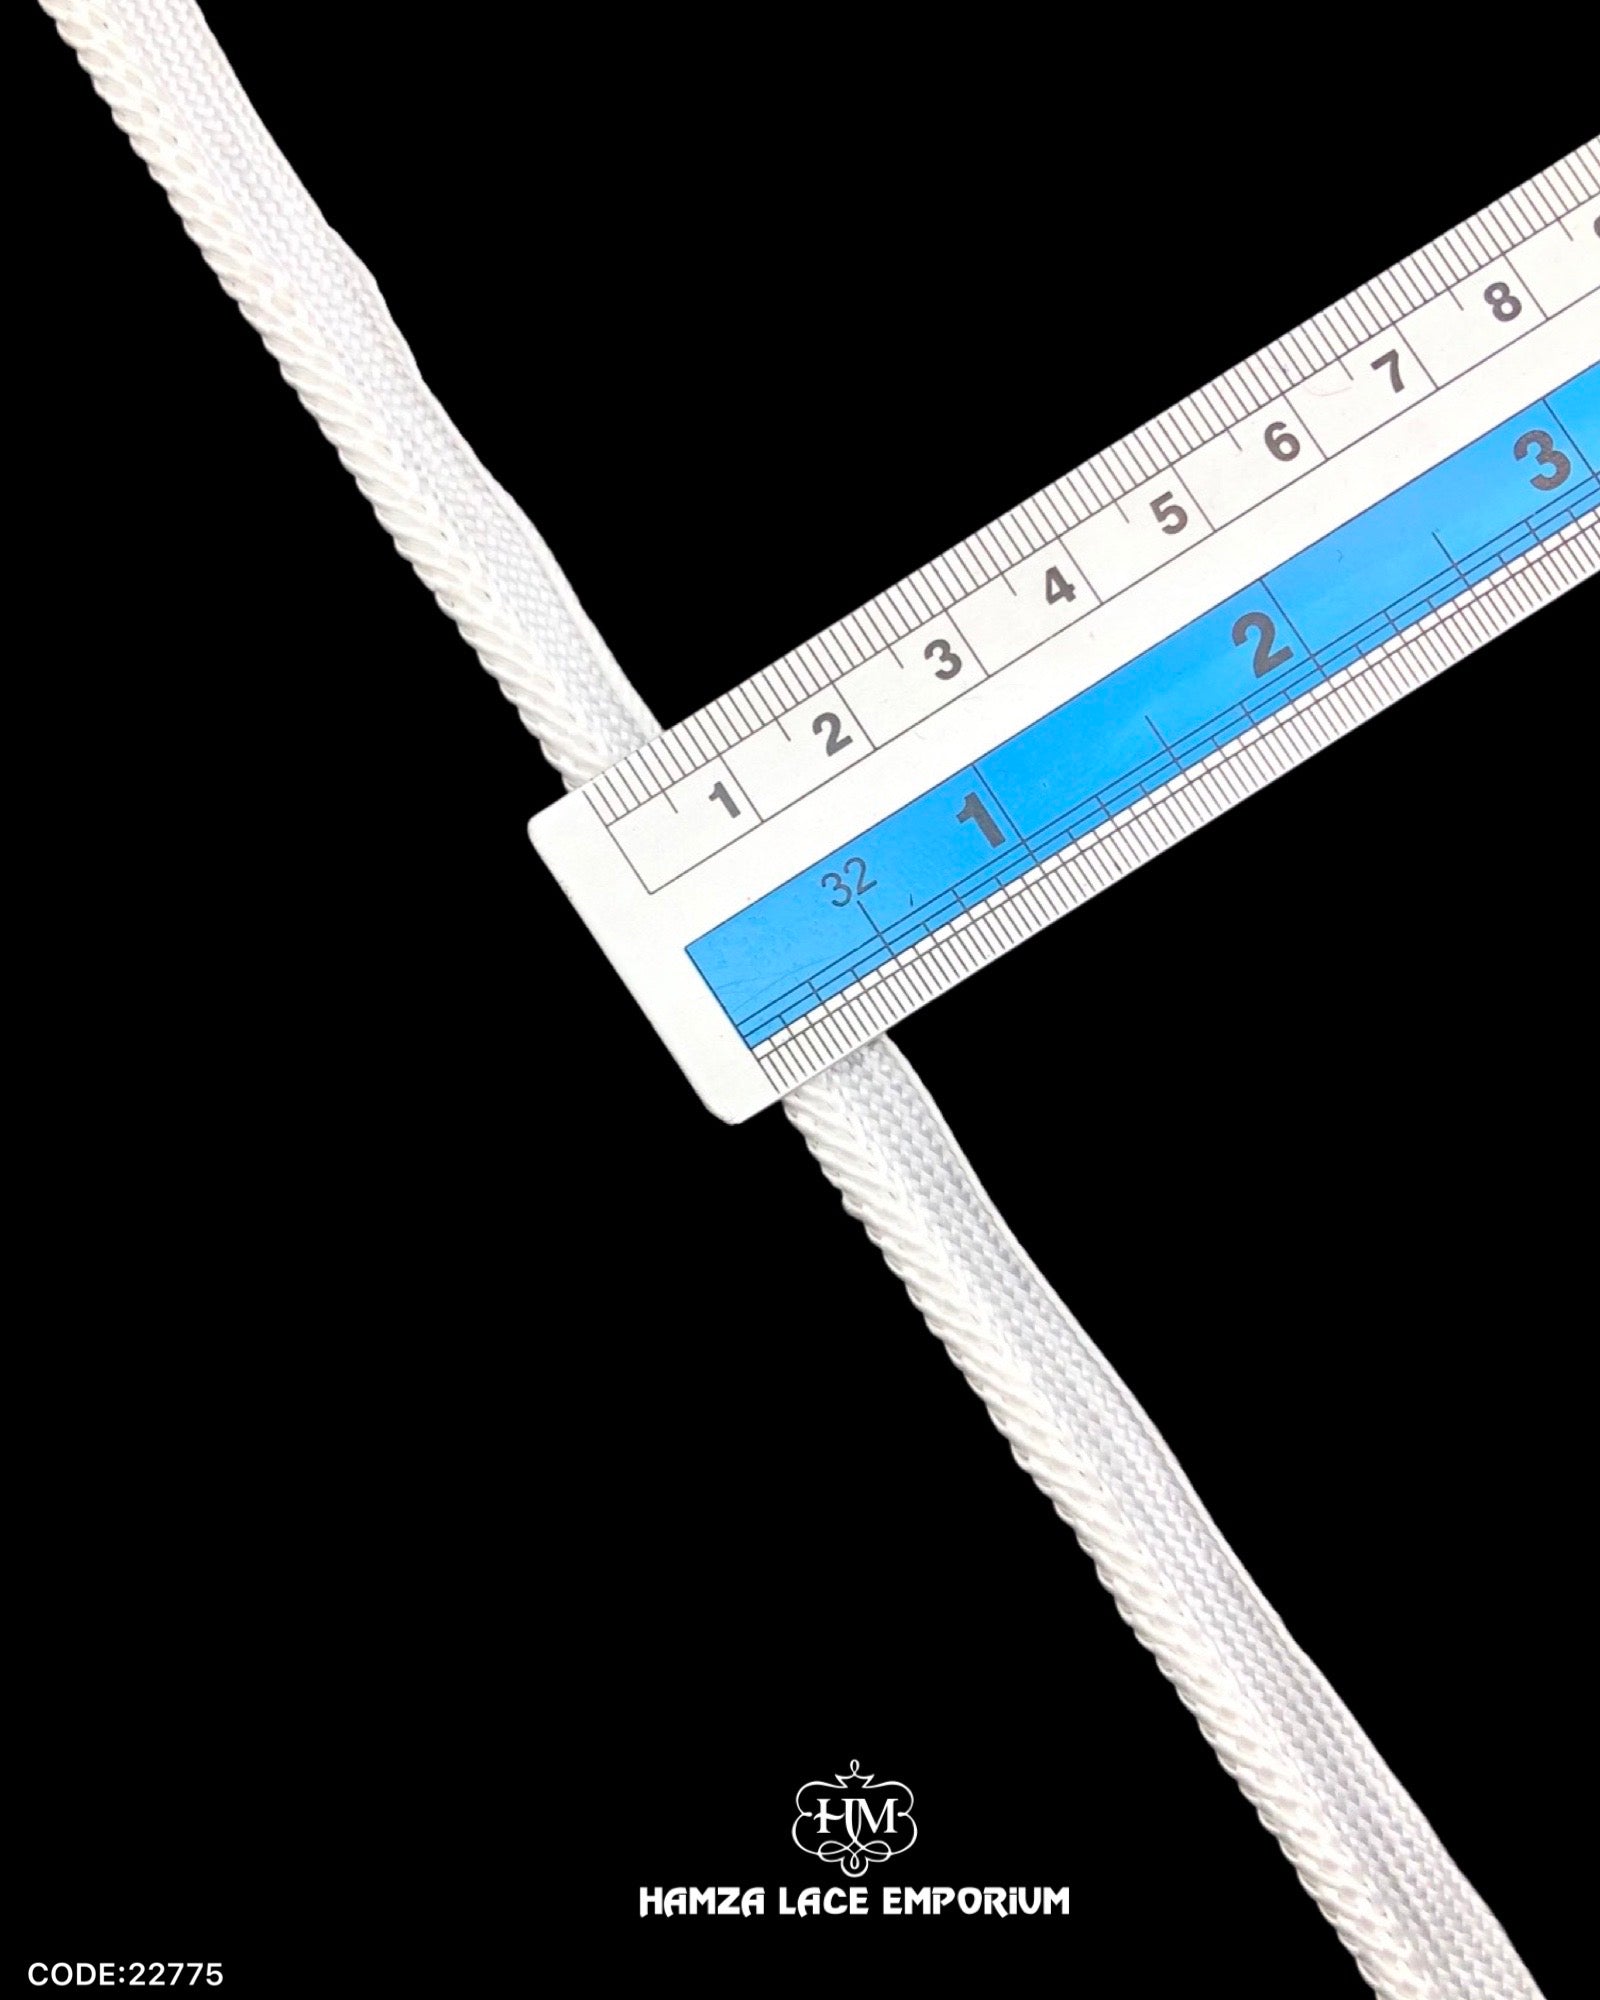 Size of the 'Edging Dori Lace 22775' is displayed with the help of a ruler